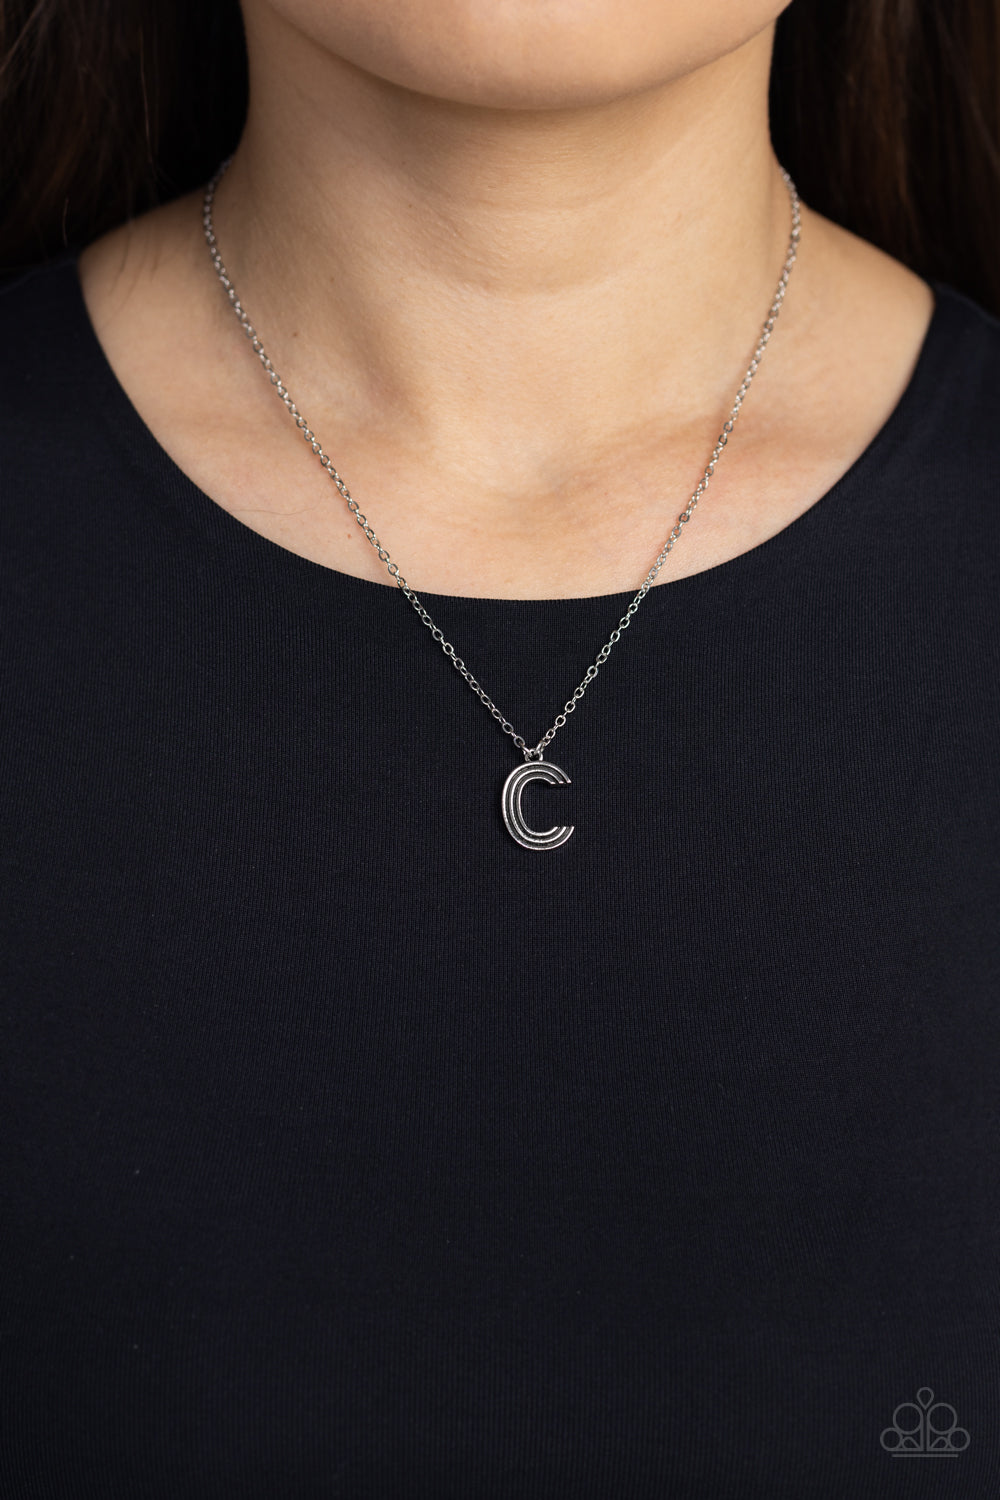 Leave Your Initials - Silver "C" Pendant Paparazzi Necklace & matching earrings